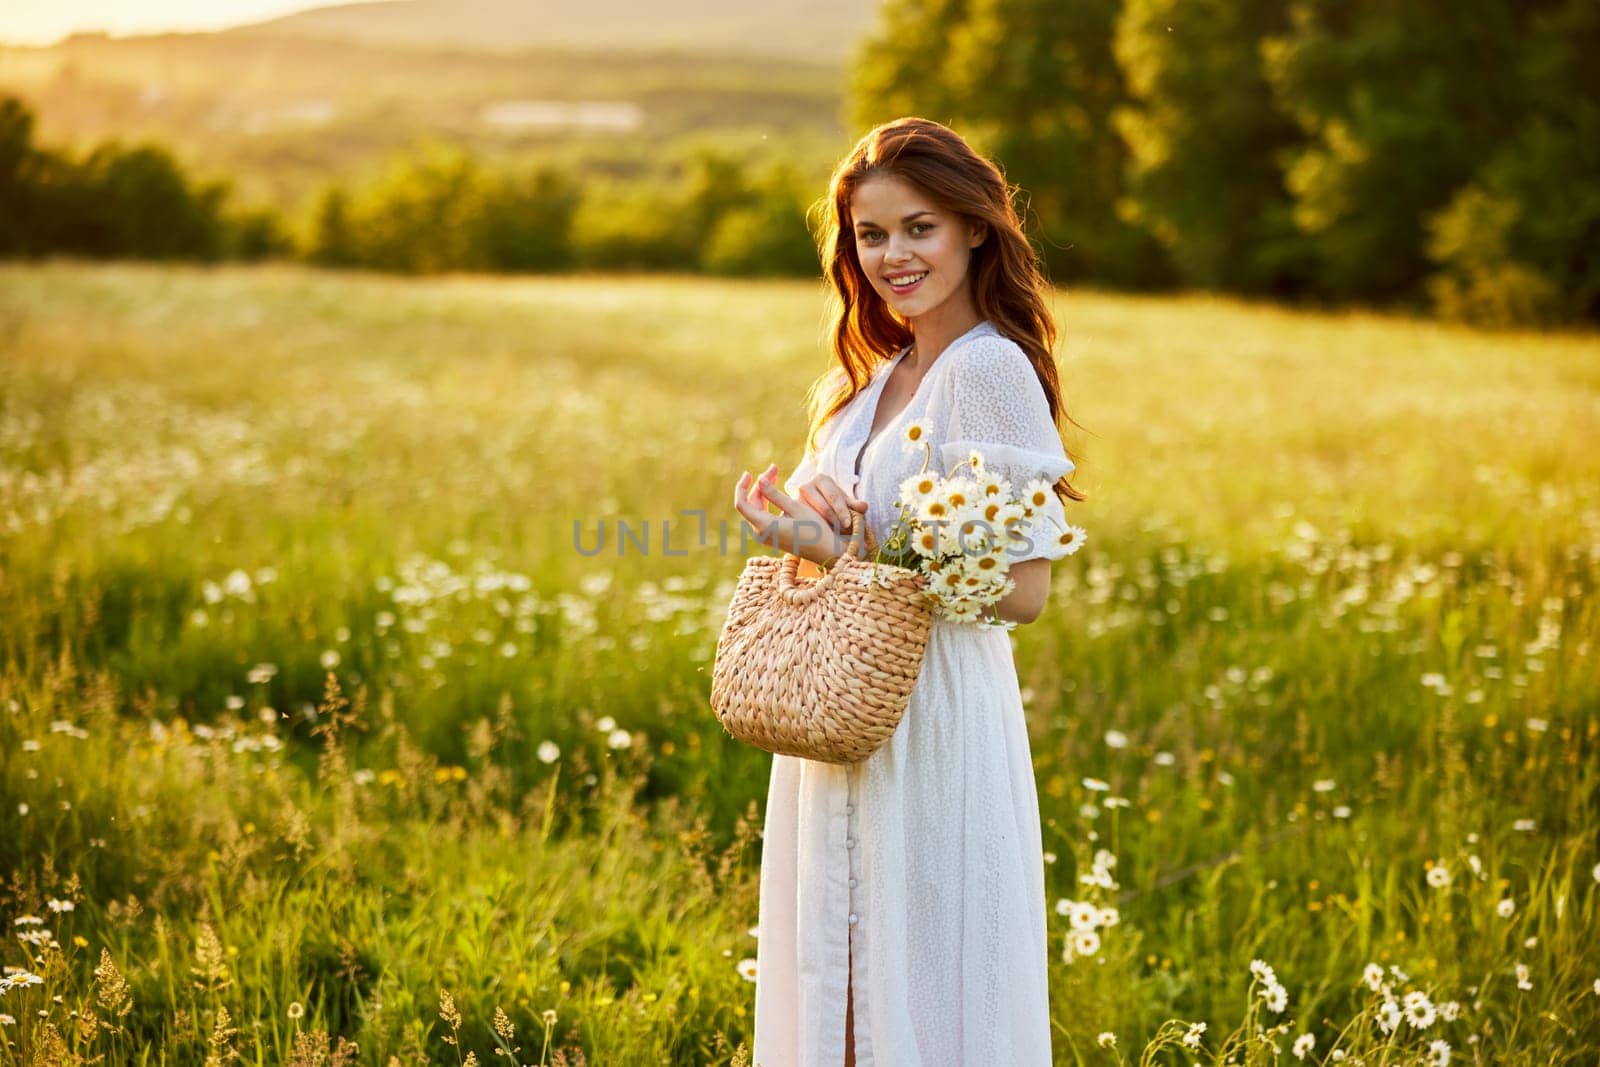 a beautiful woman in a light dress and a basket of daisies in her hands stands in a field during sunset and smiles at the camera by Vichizh